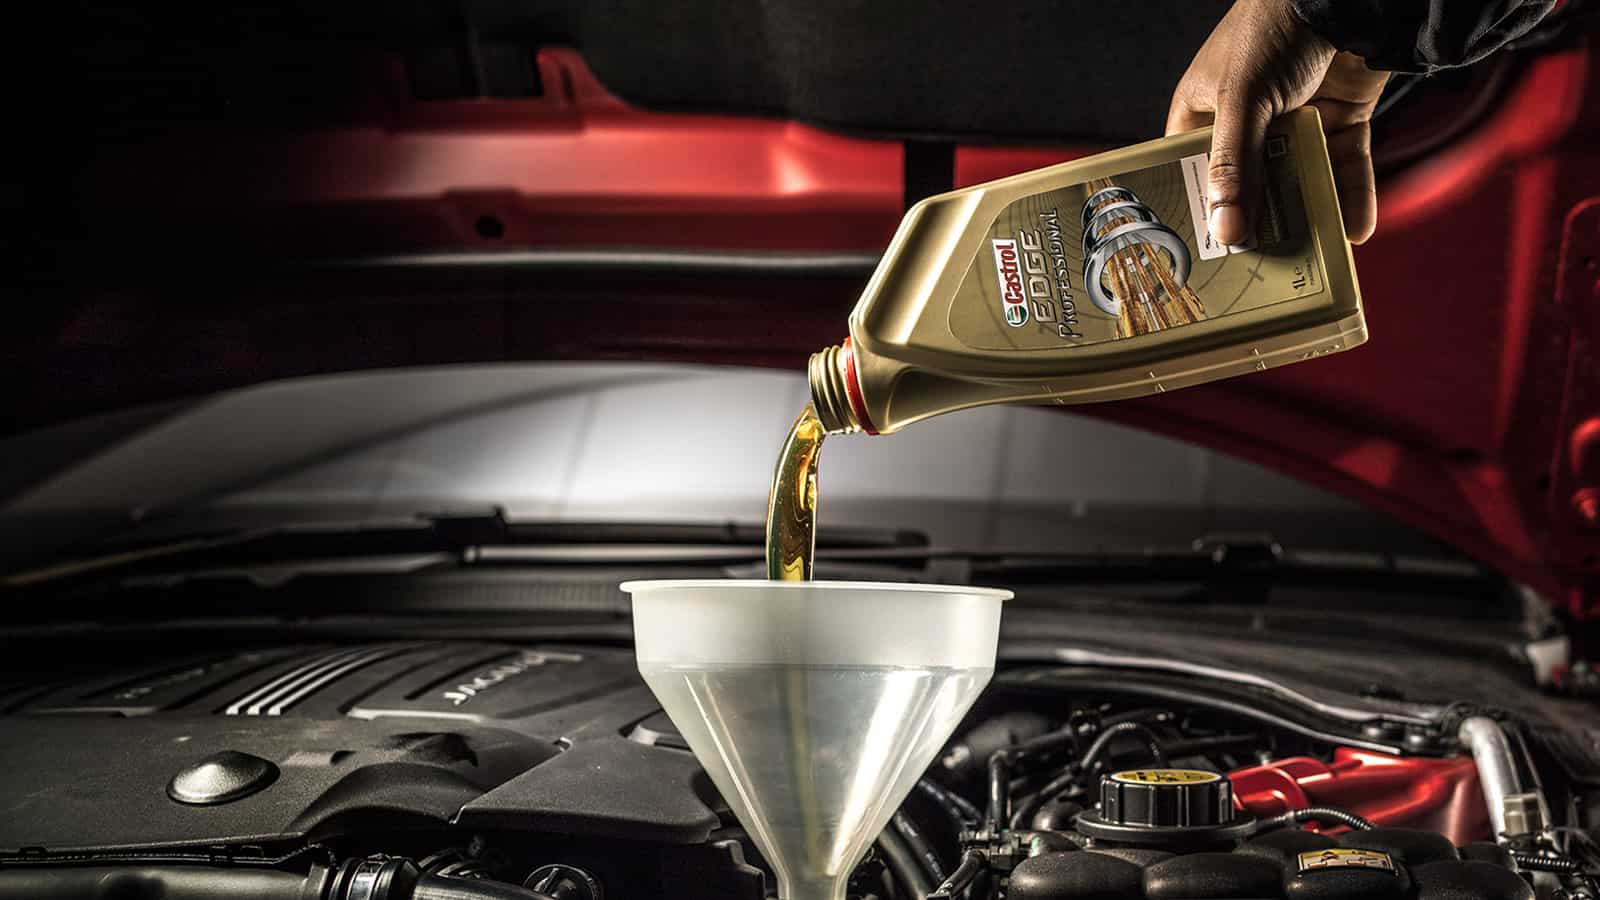 A bottle of Castrol EDGE professional oil being pored into a Jaguar engine.